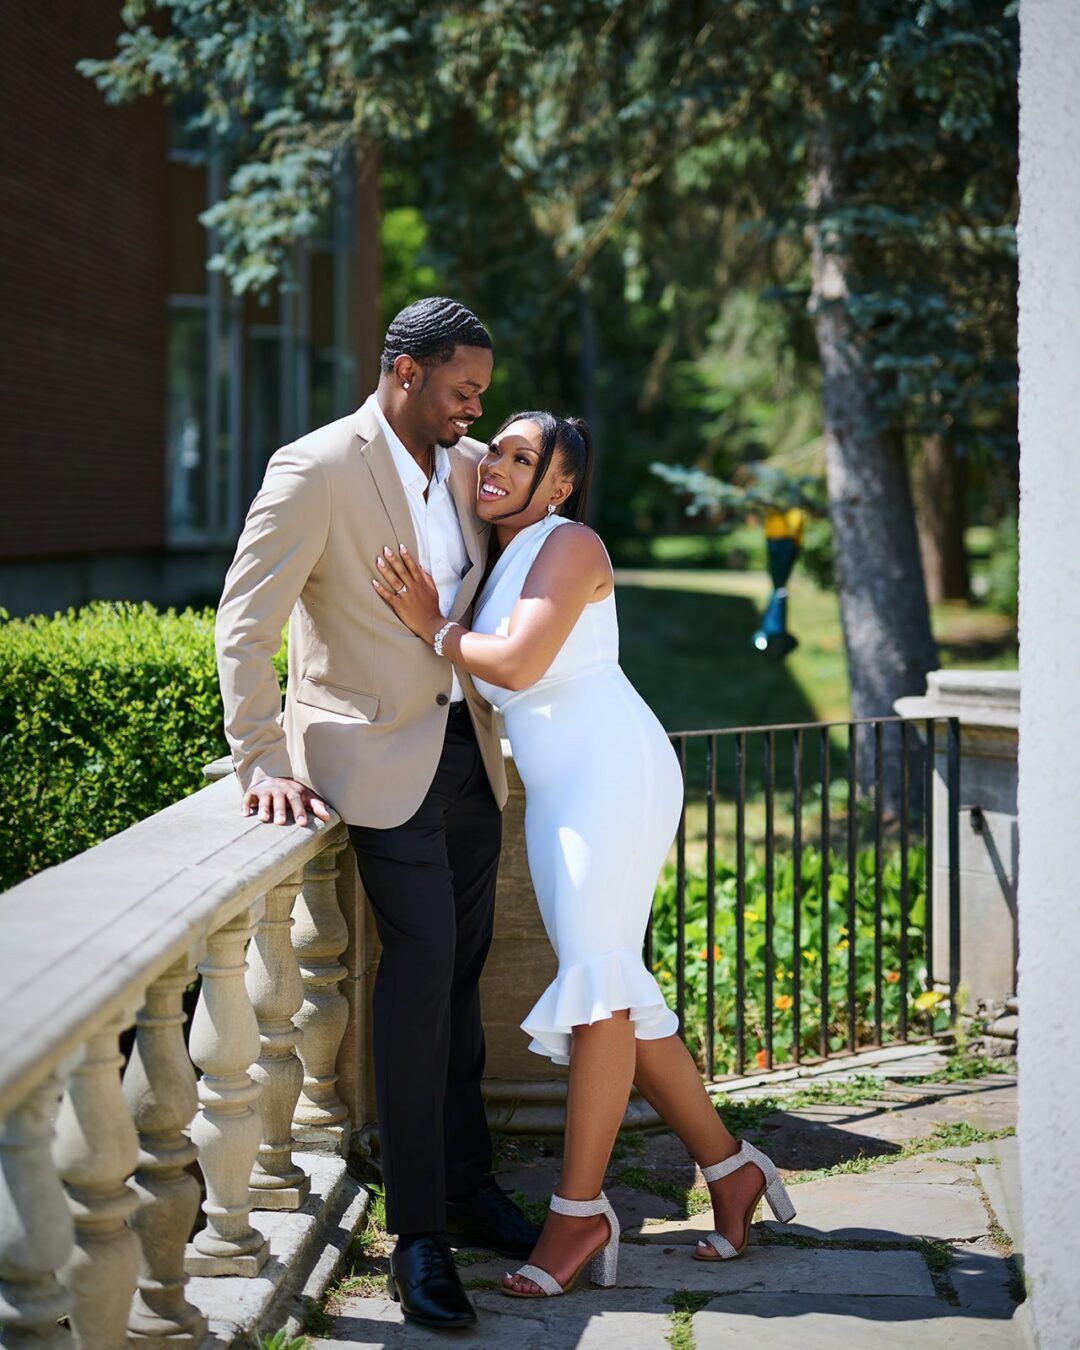 Rochelle & Devon Met in College and It Was Love at First Sight!